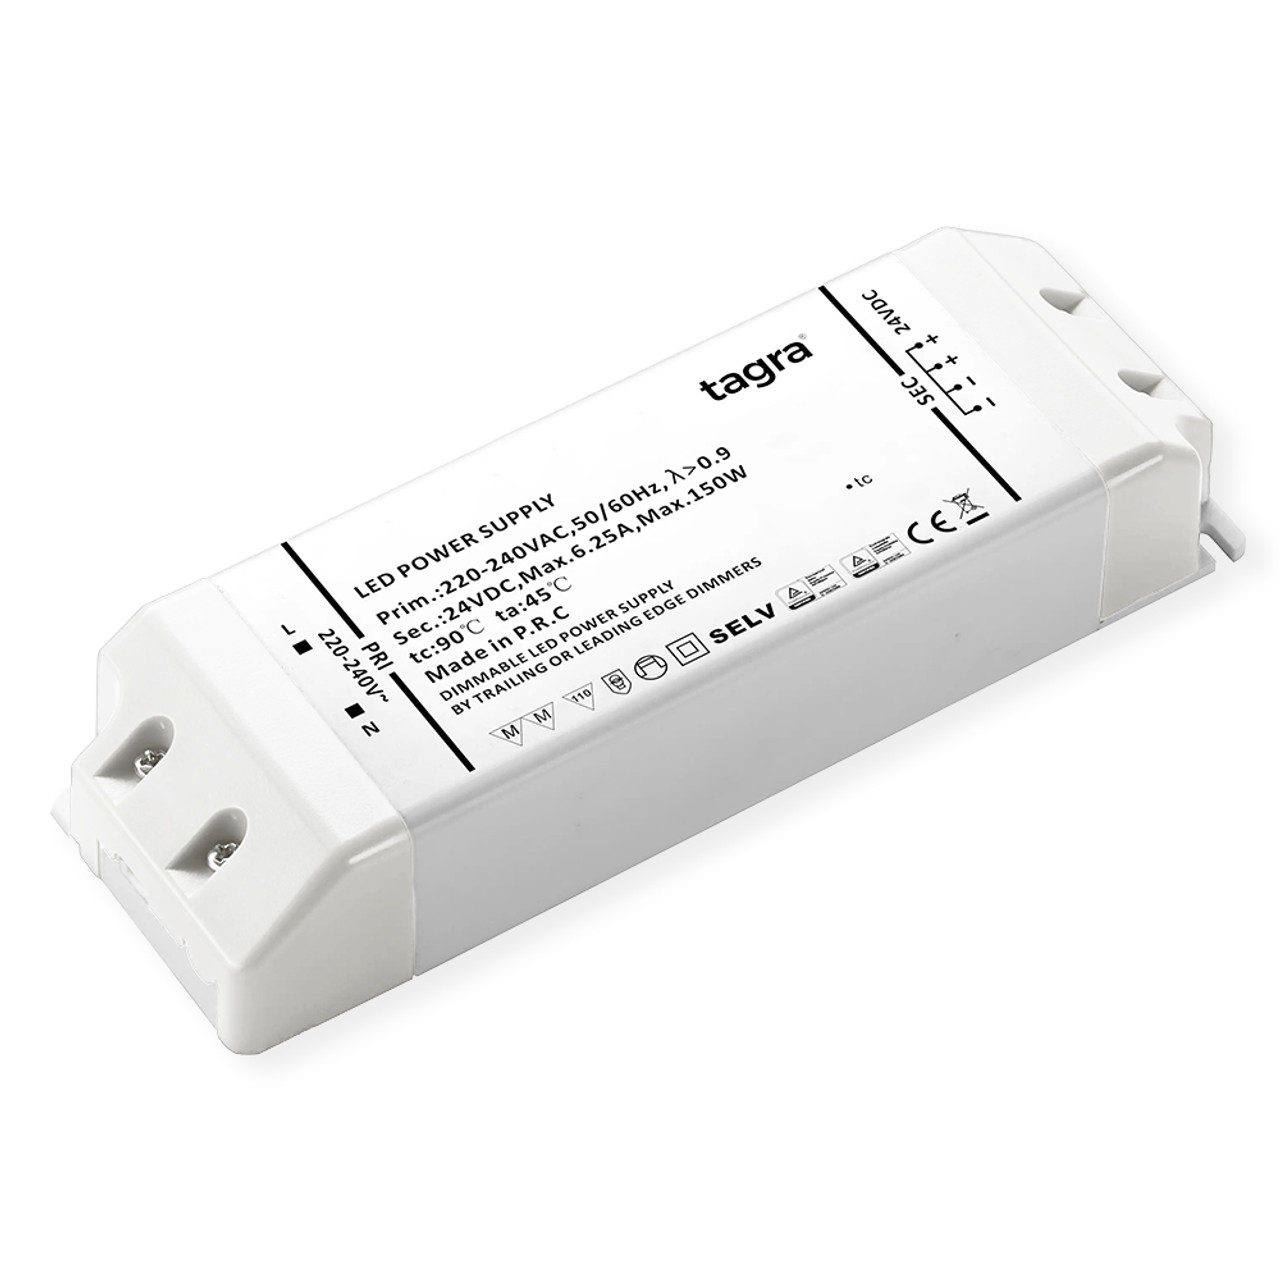 What Is an LED Driver & Which Driver Do I Need? - UltraLEDs